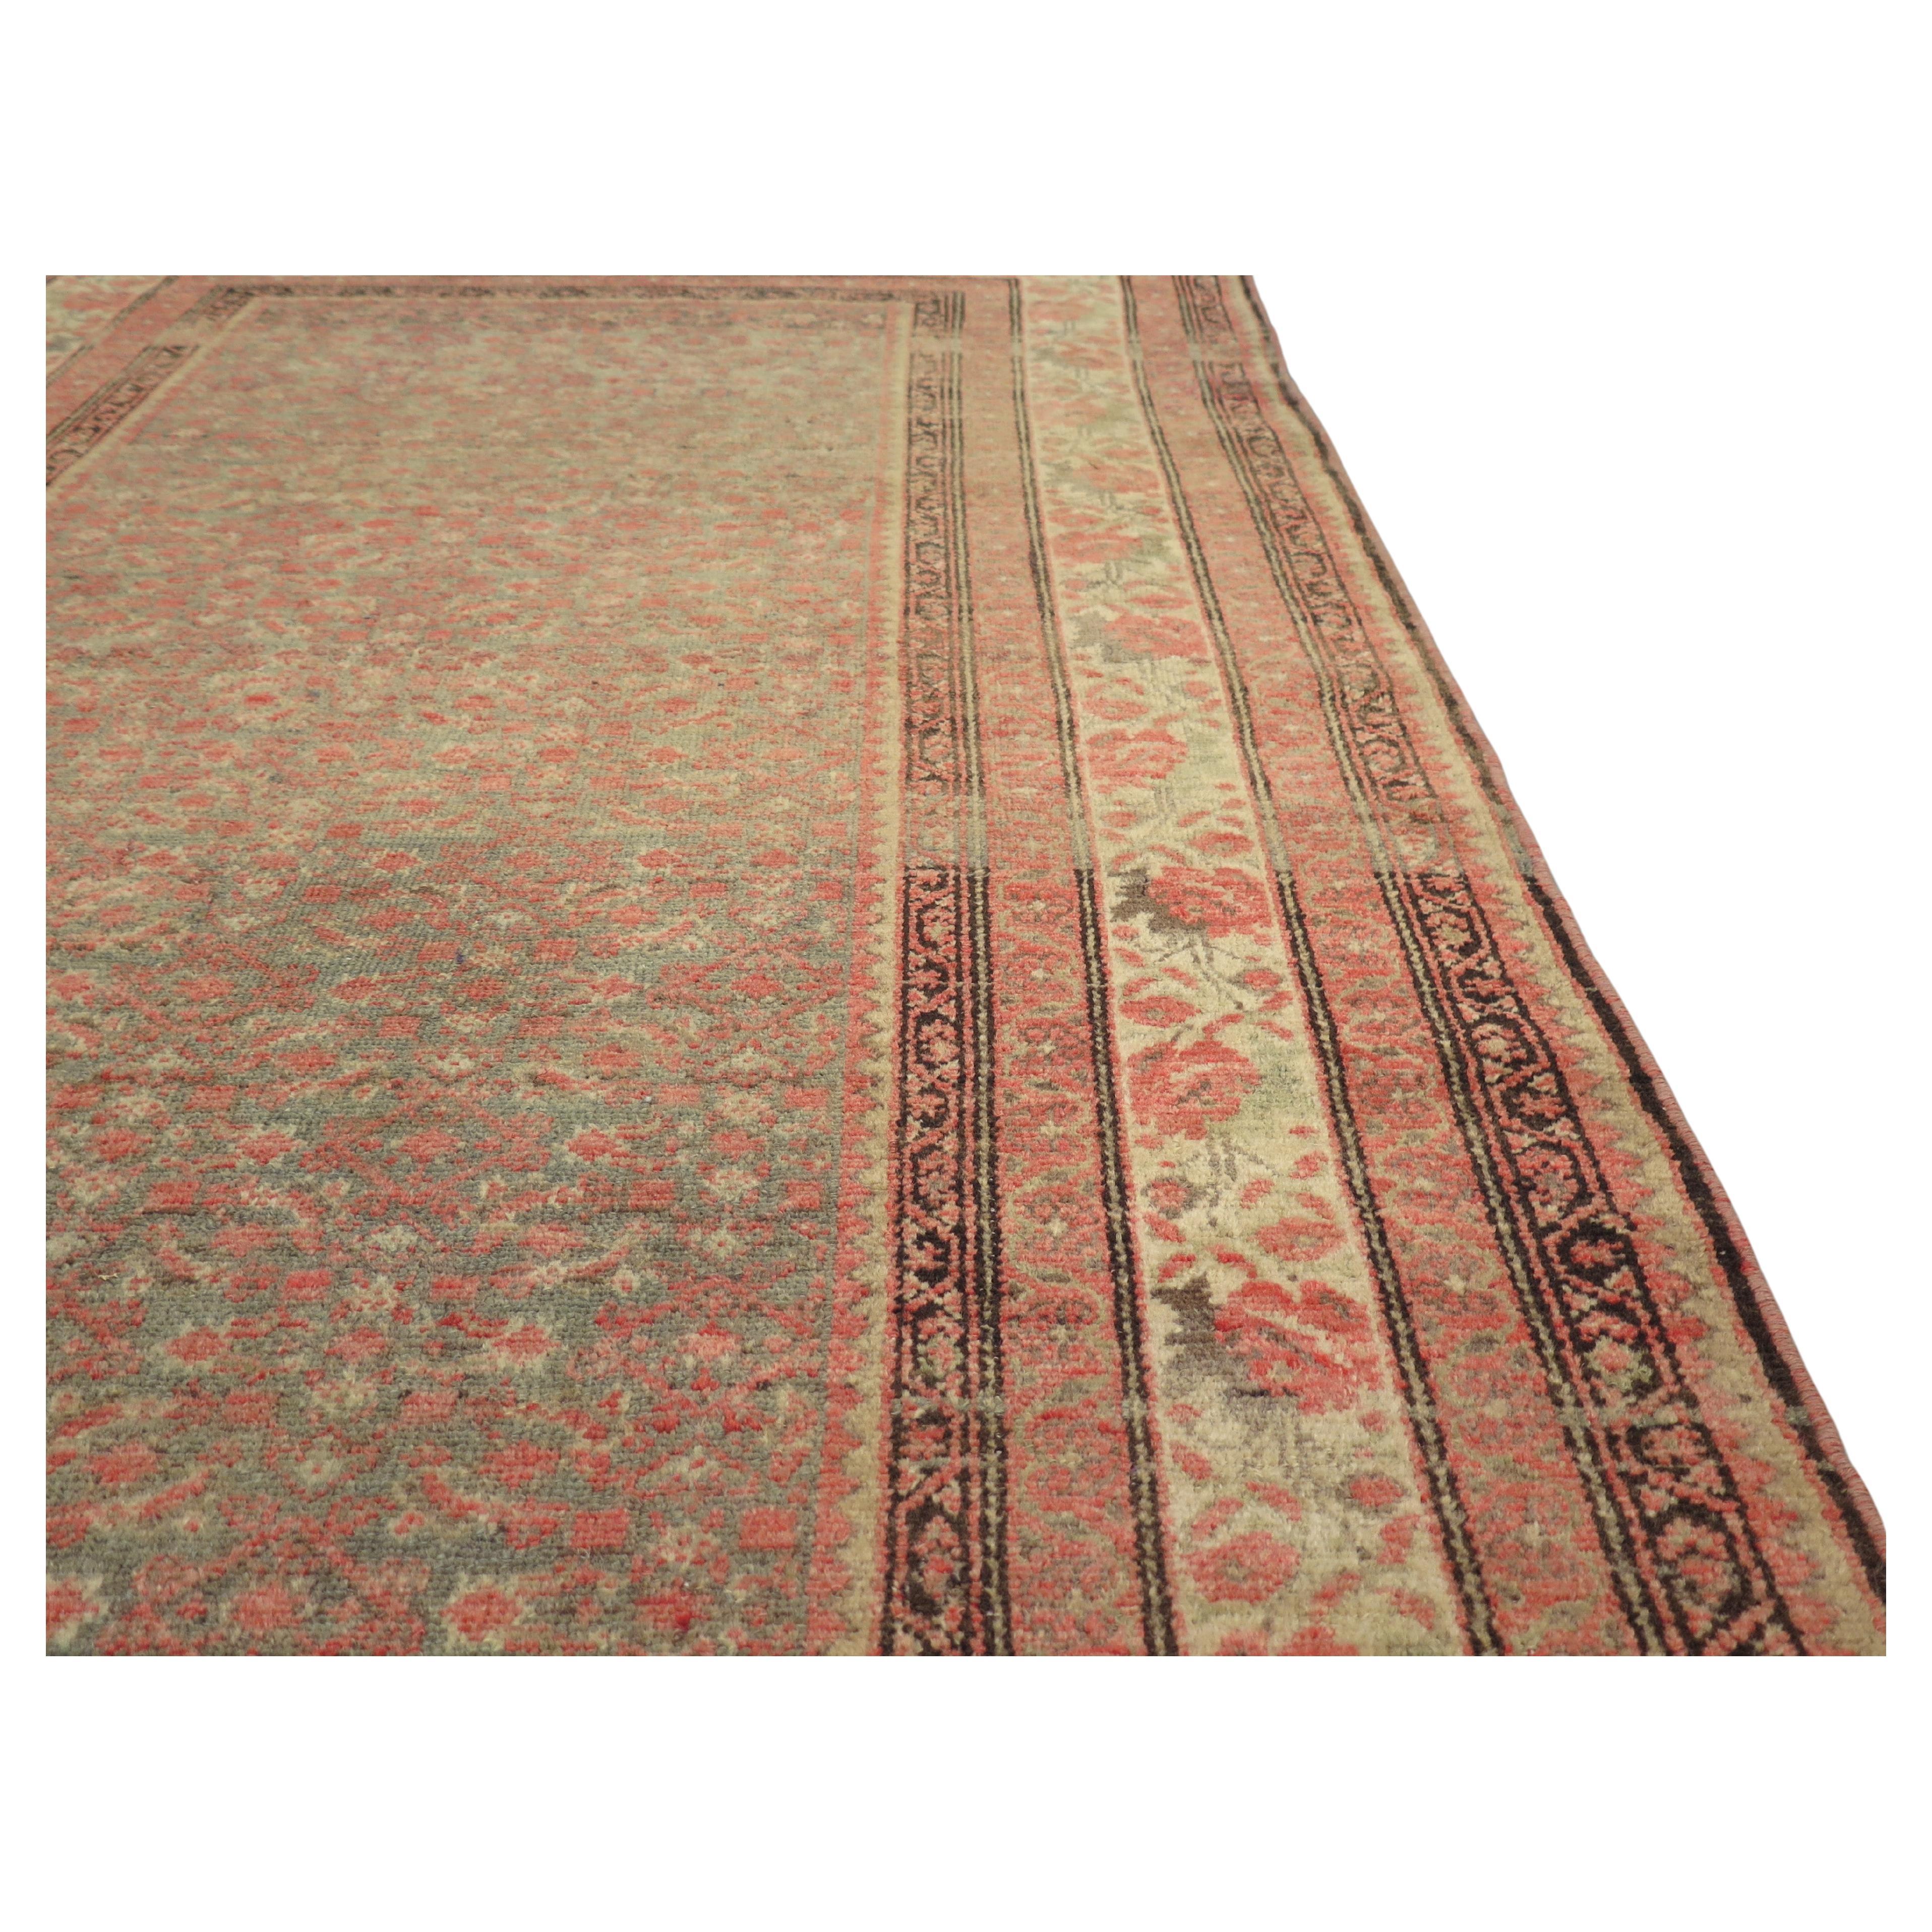 Understated Anatolian Accent Rug, c. 1900s